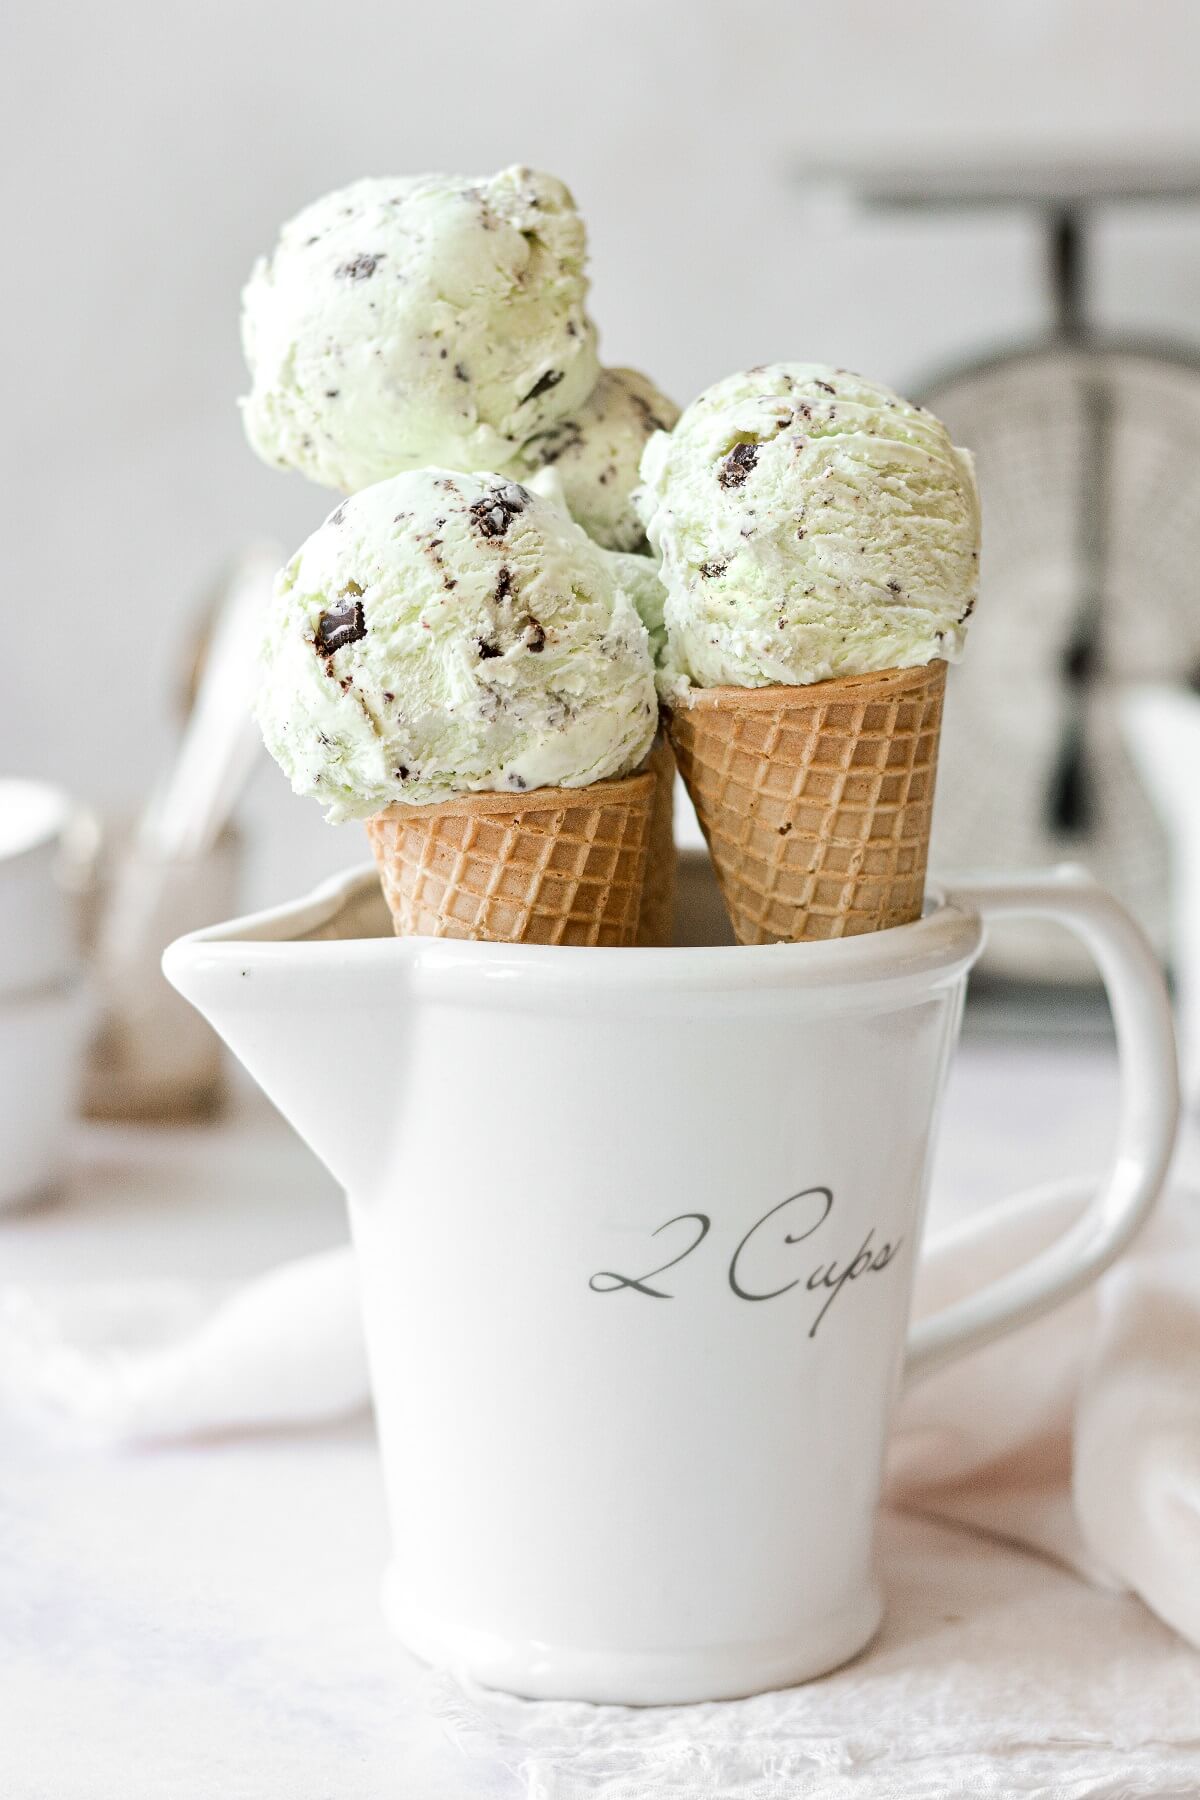 Mint chocolate chip ice cream in sugar cones, in a white measuring cup.